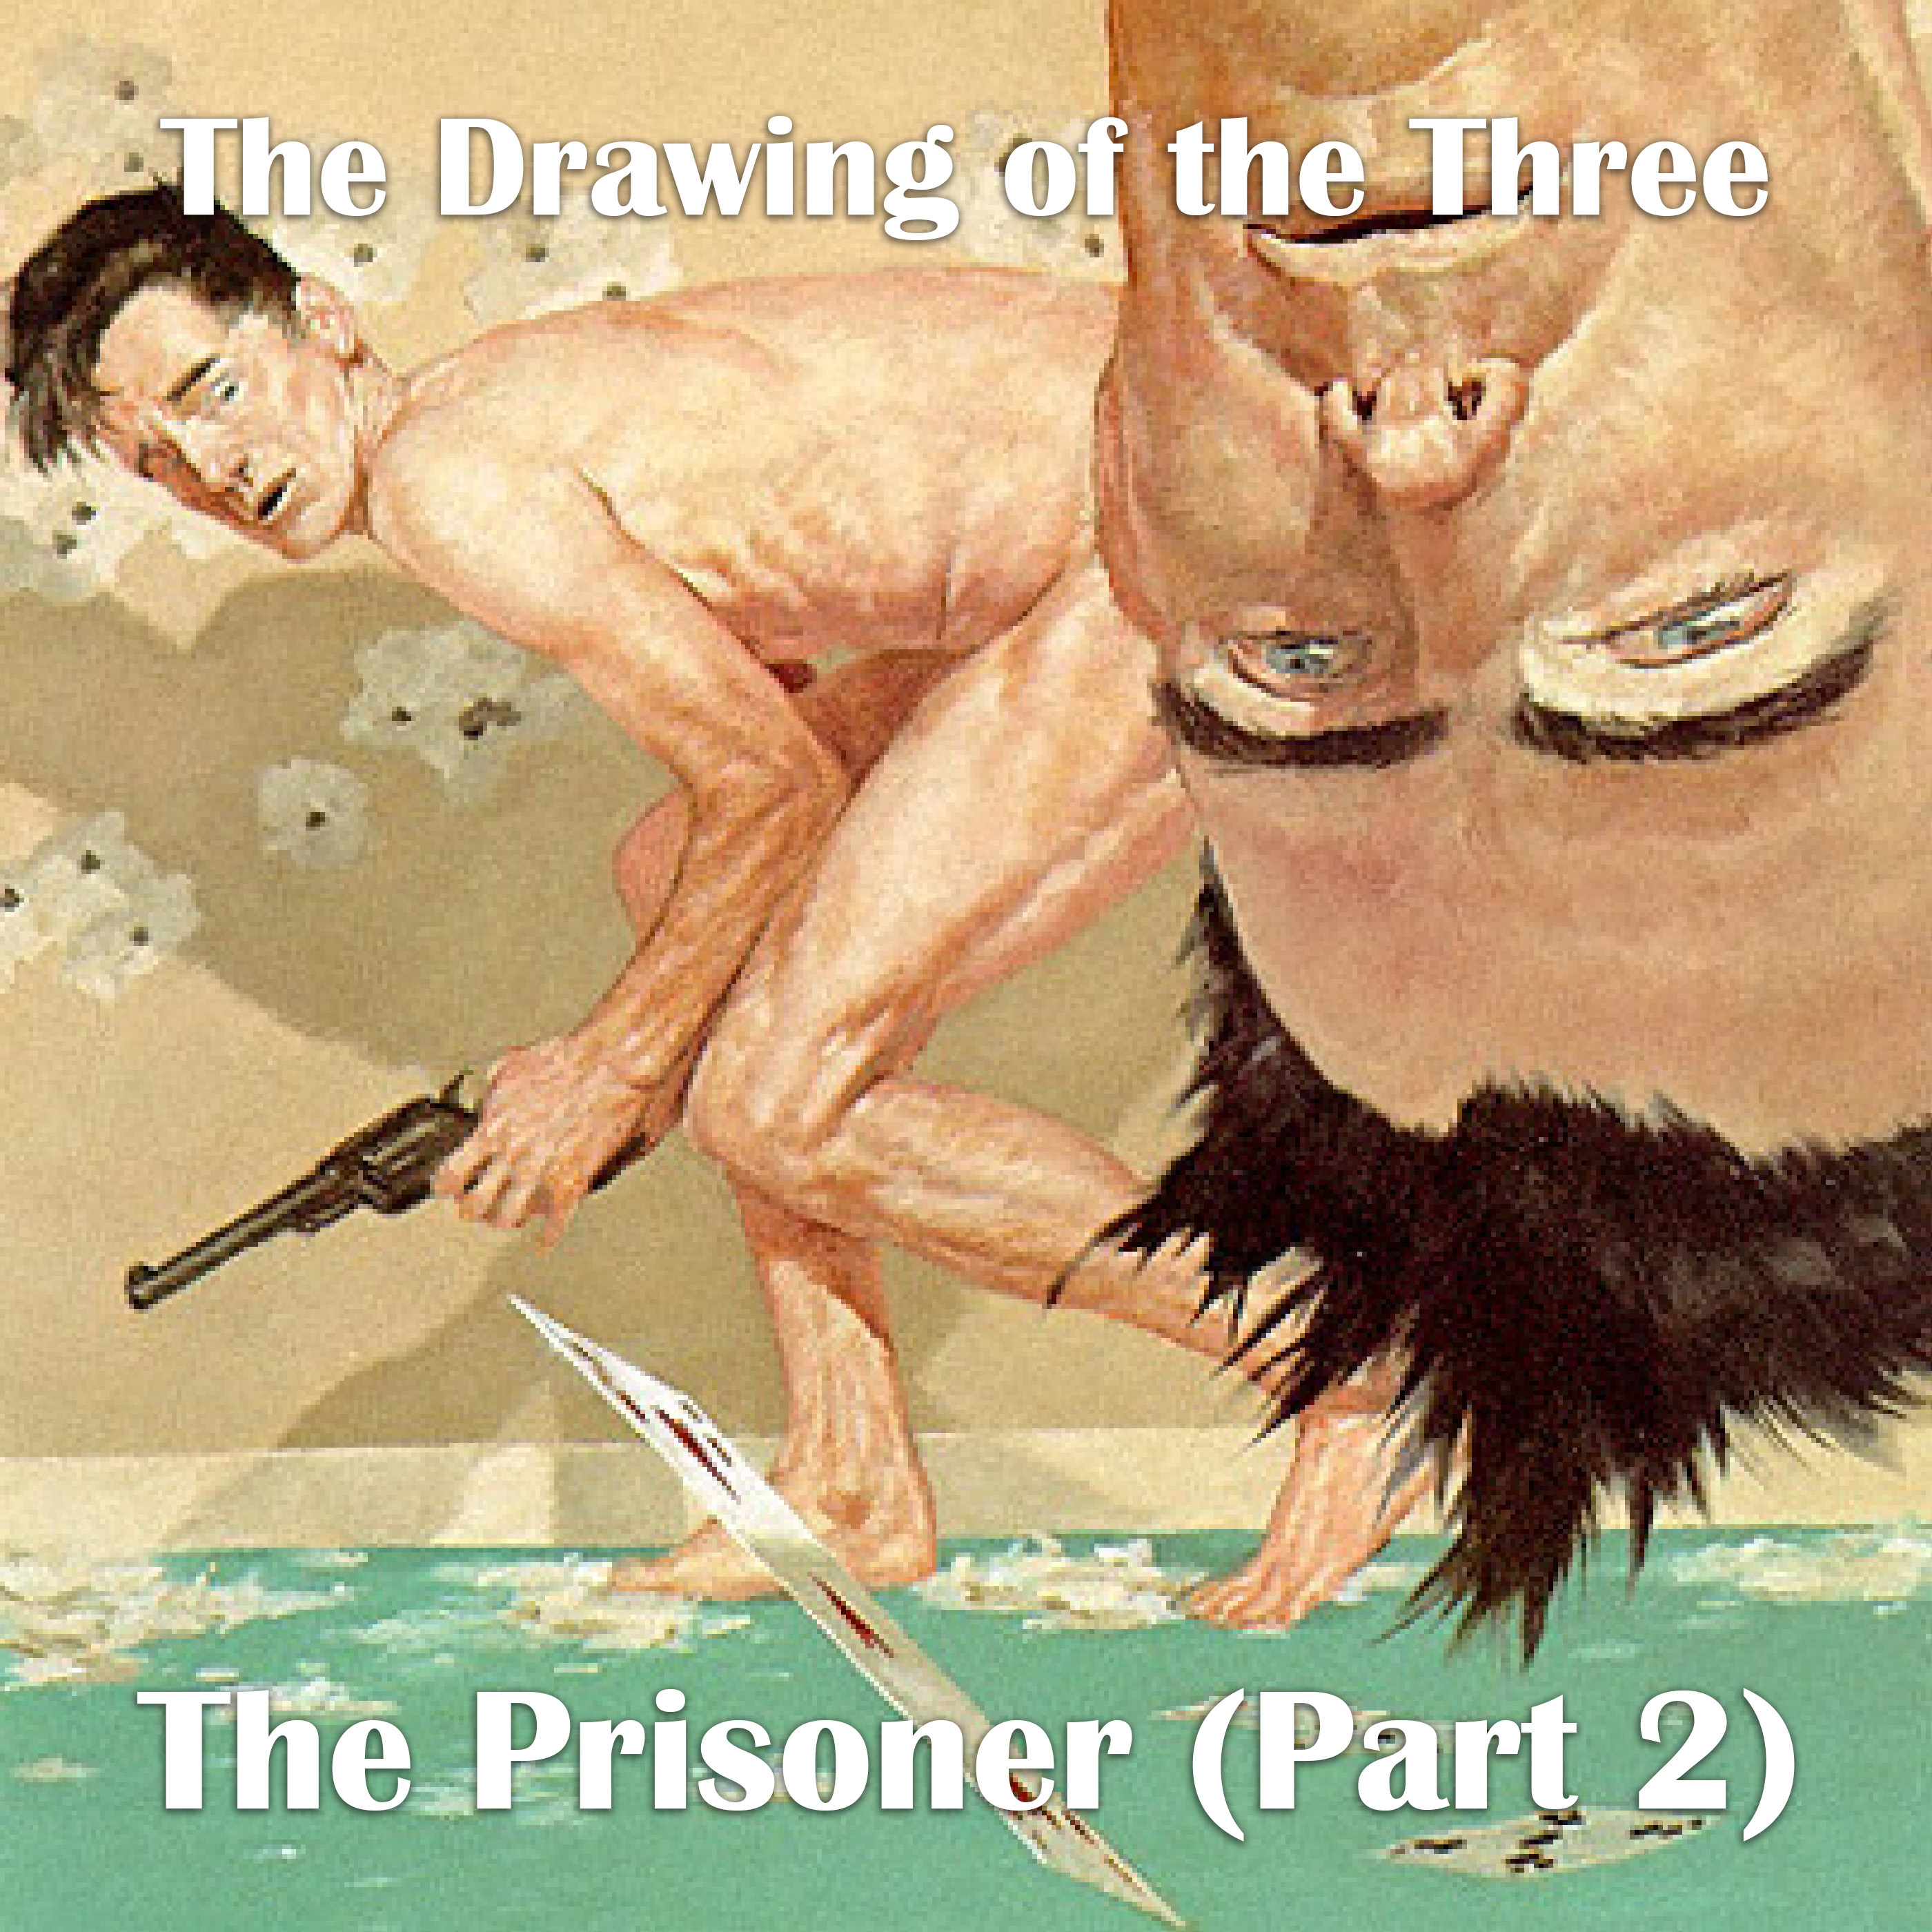 Episode 8: The Drawing of the Three: ”The Prisoner (Part 2)”